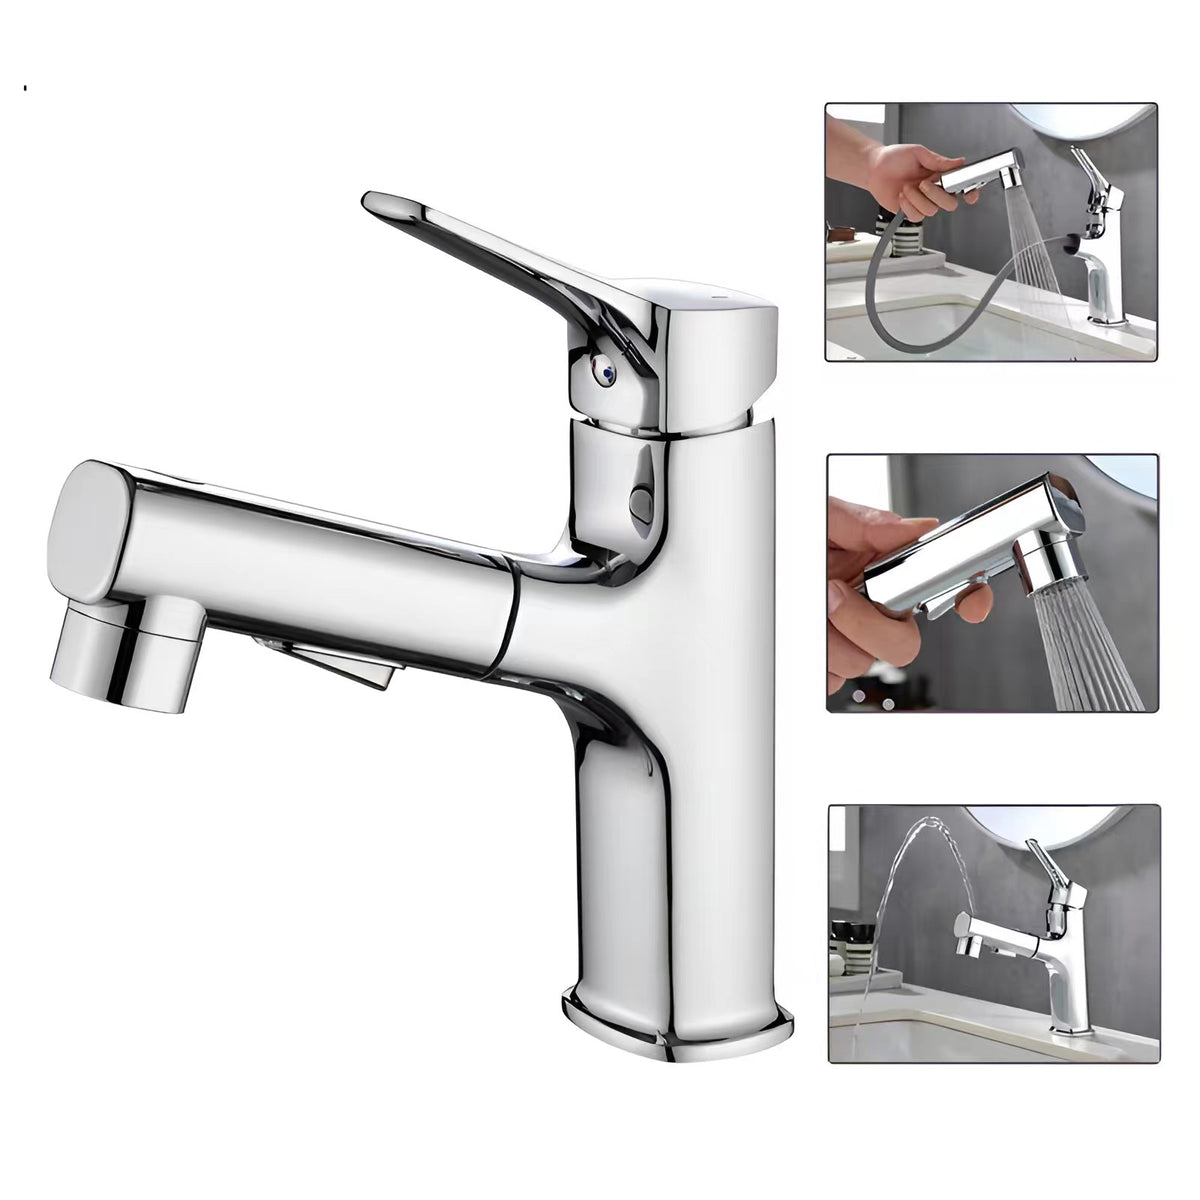 2 Modes Hot and Cold Pull-Out Bathroom Basin Taps- Sliver